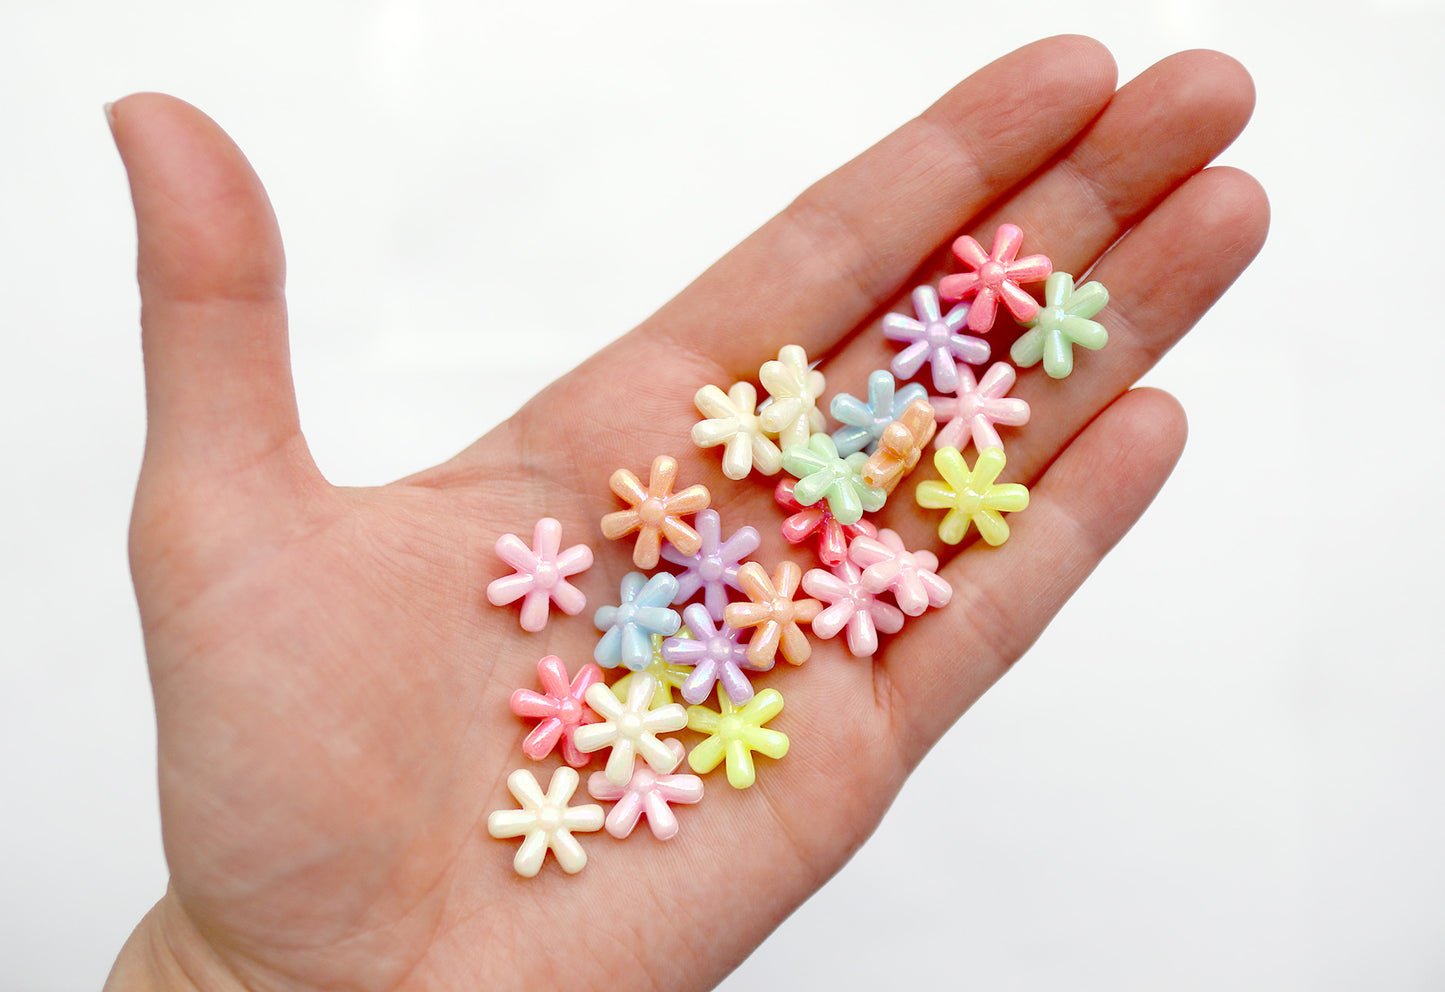 Flower Beads - 13mm AB Pastel 6-Petal Flower Beautiful Bright Iridescent Color Plastic Acrylic or Resin Beads – 100 pc set